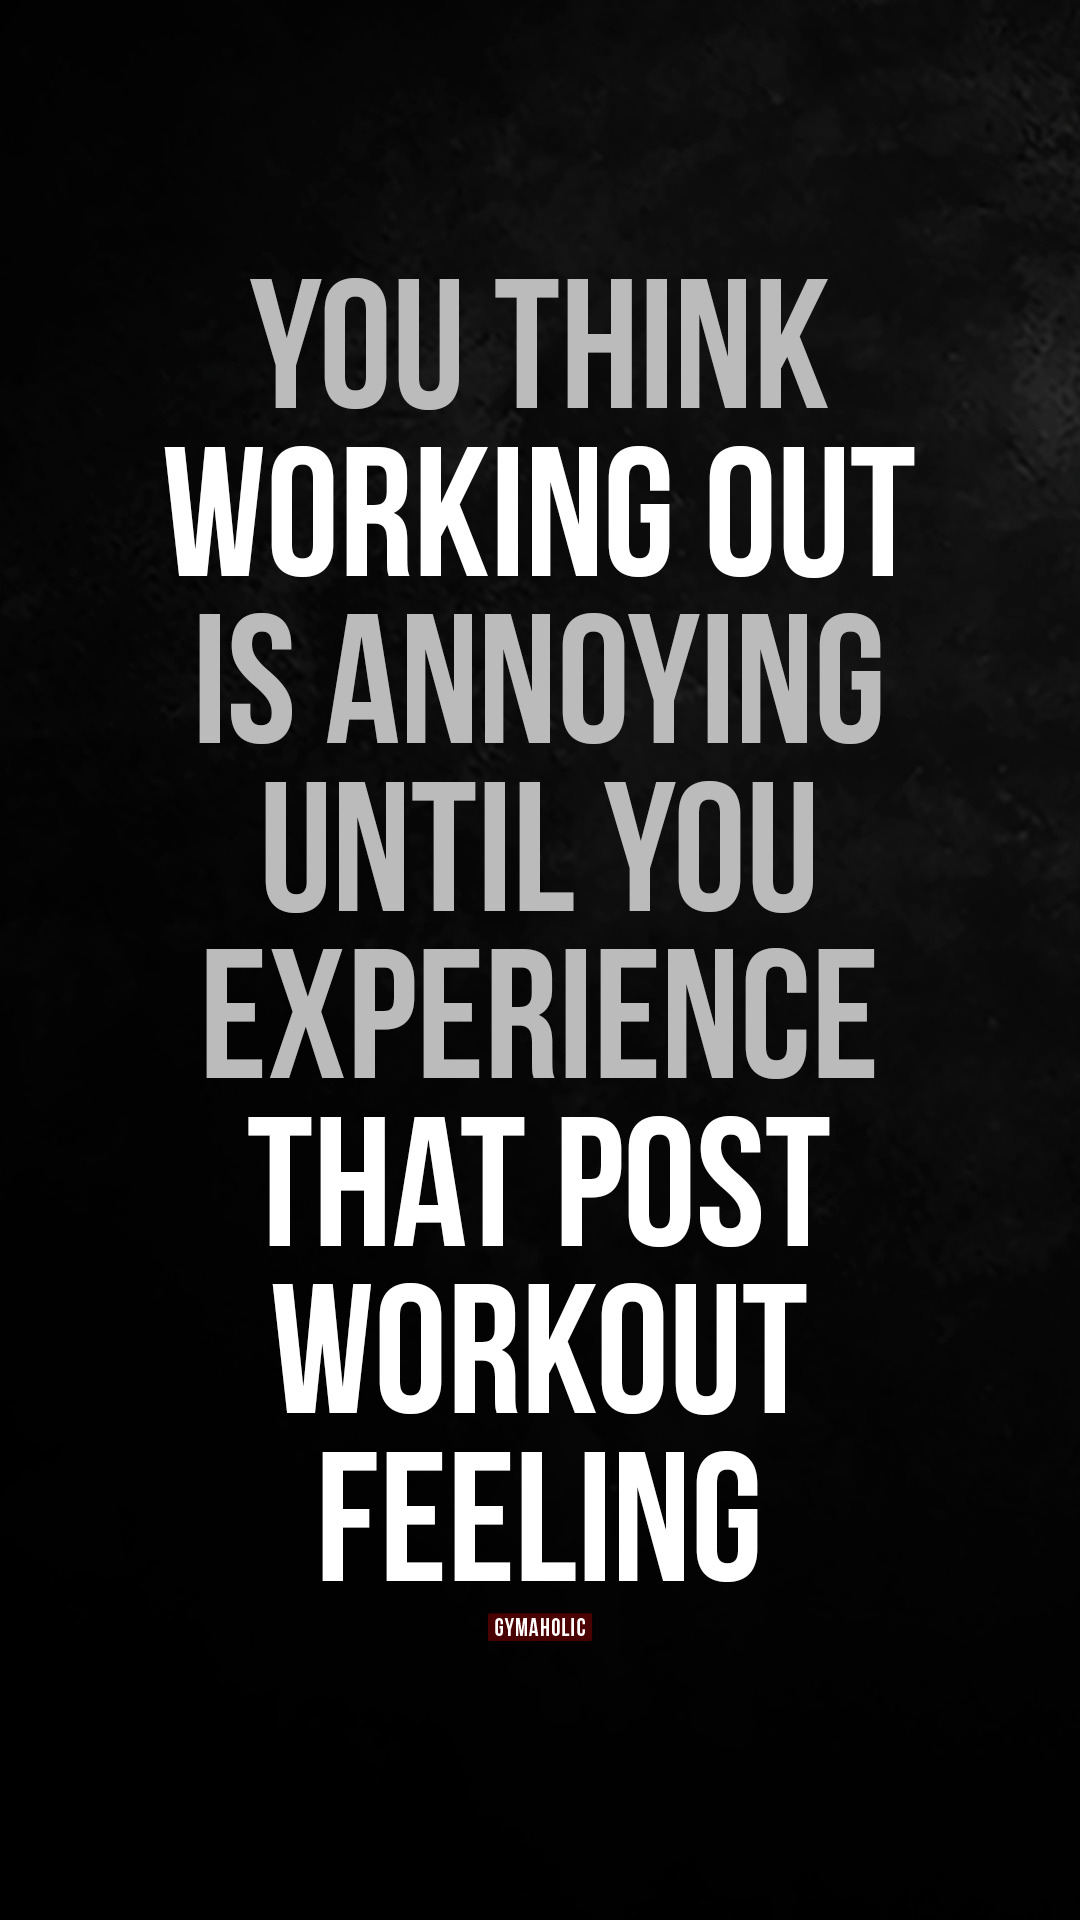 You think working out is annoying